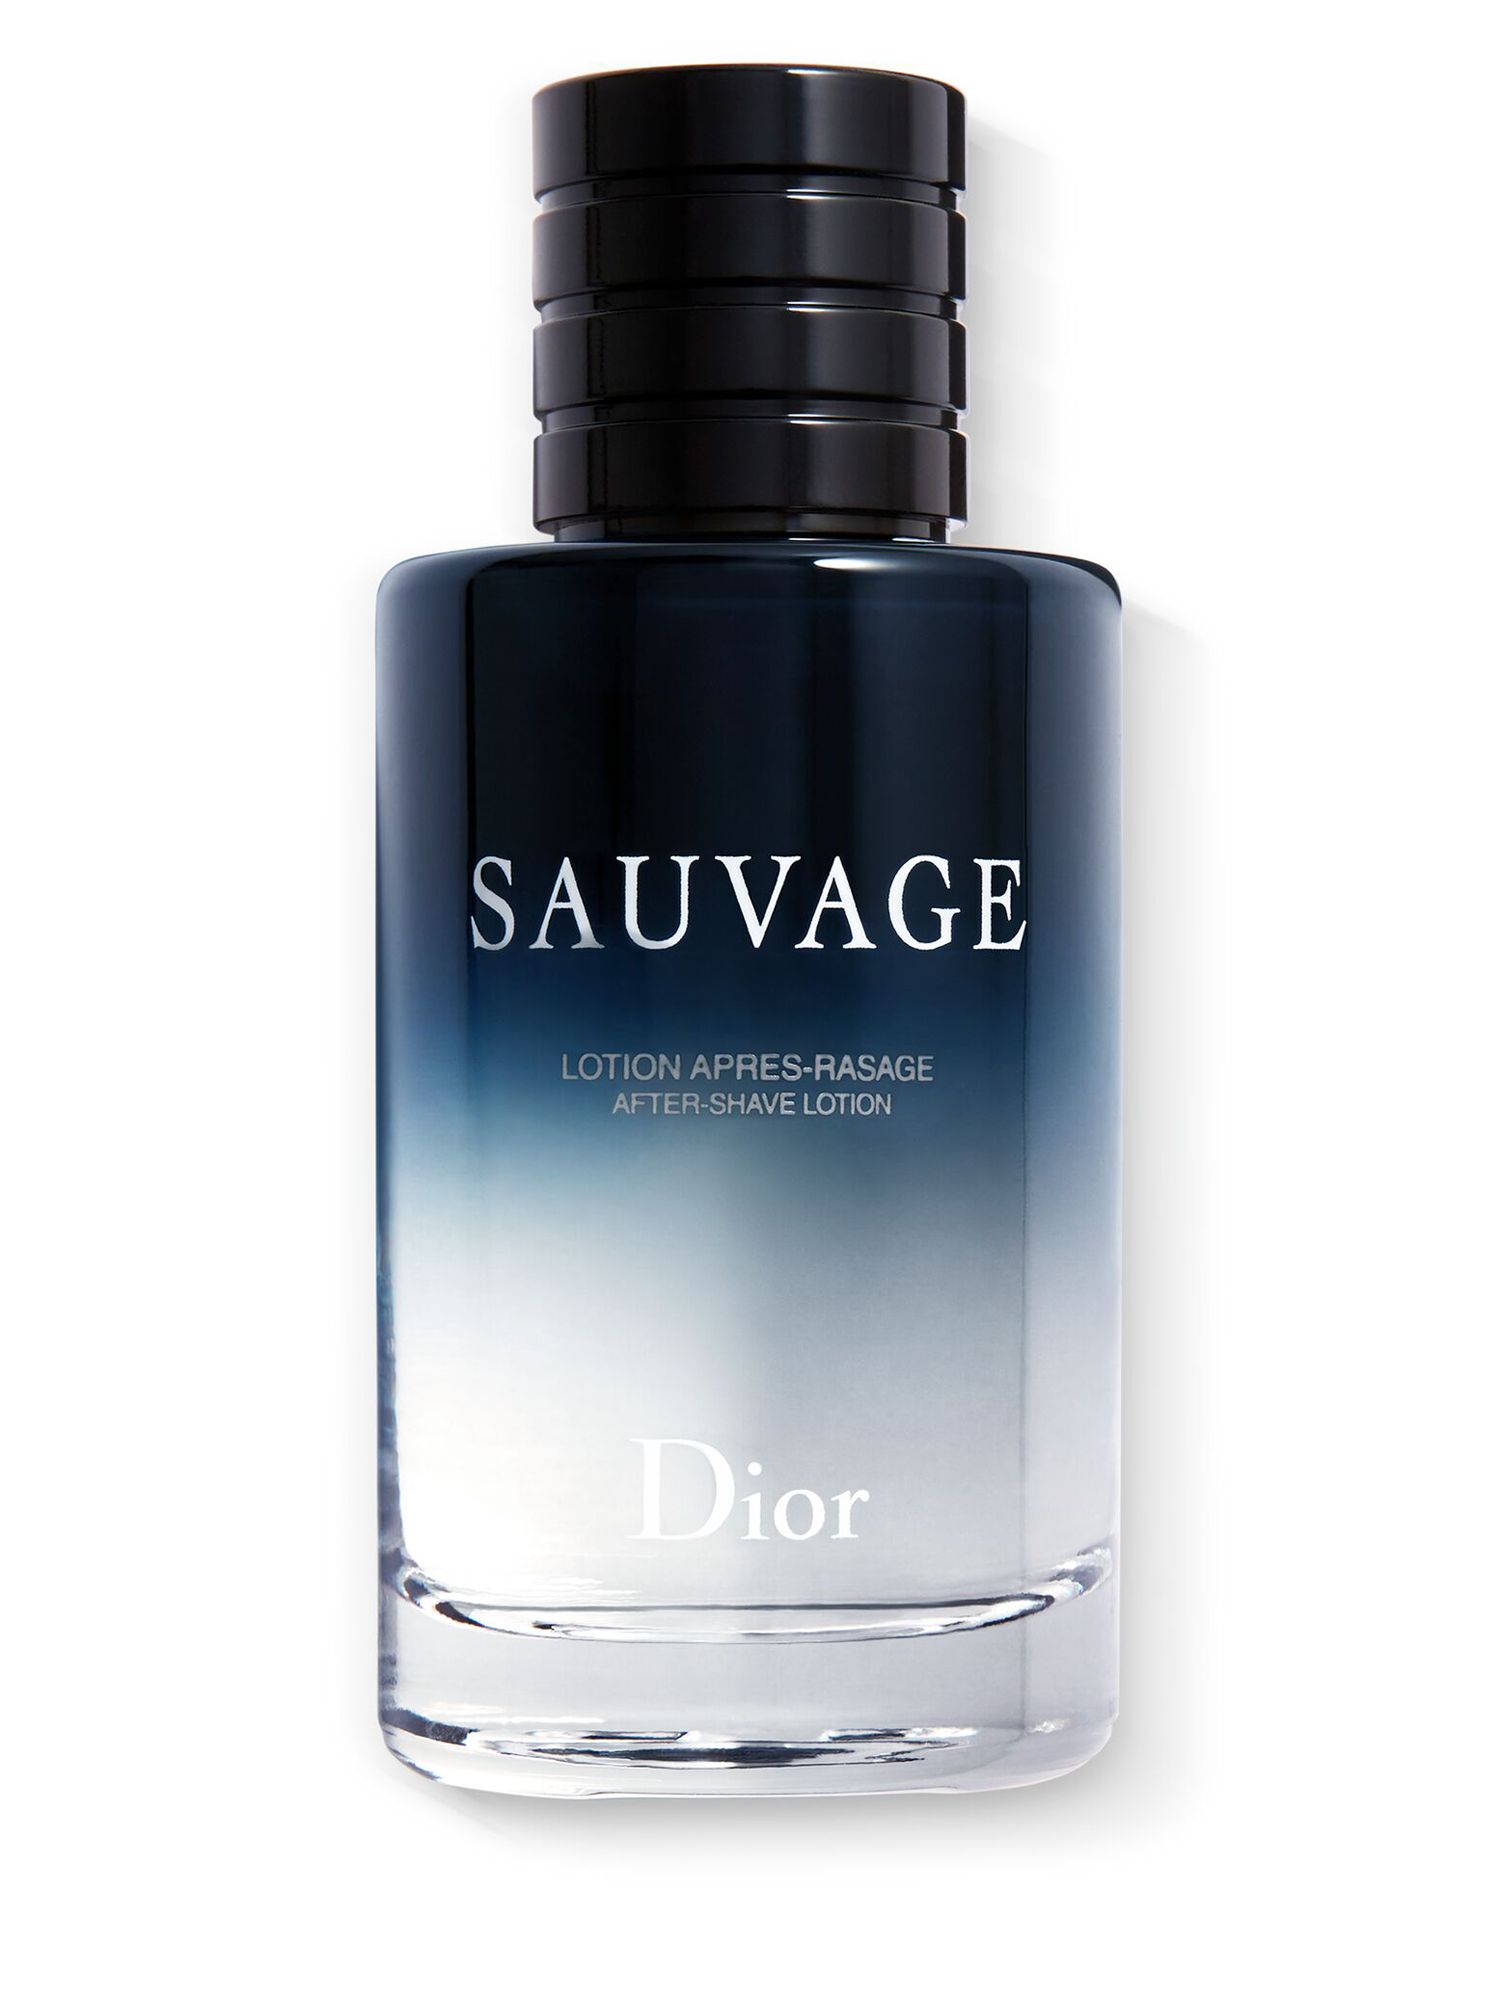 dior sauvage house of fraser